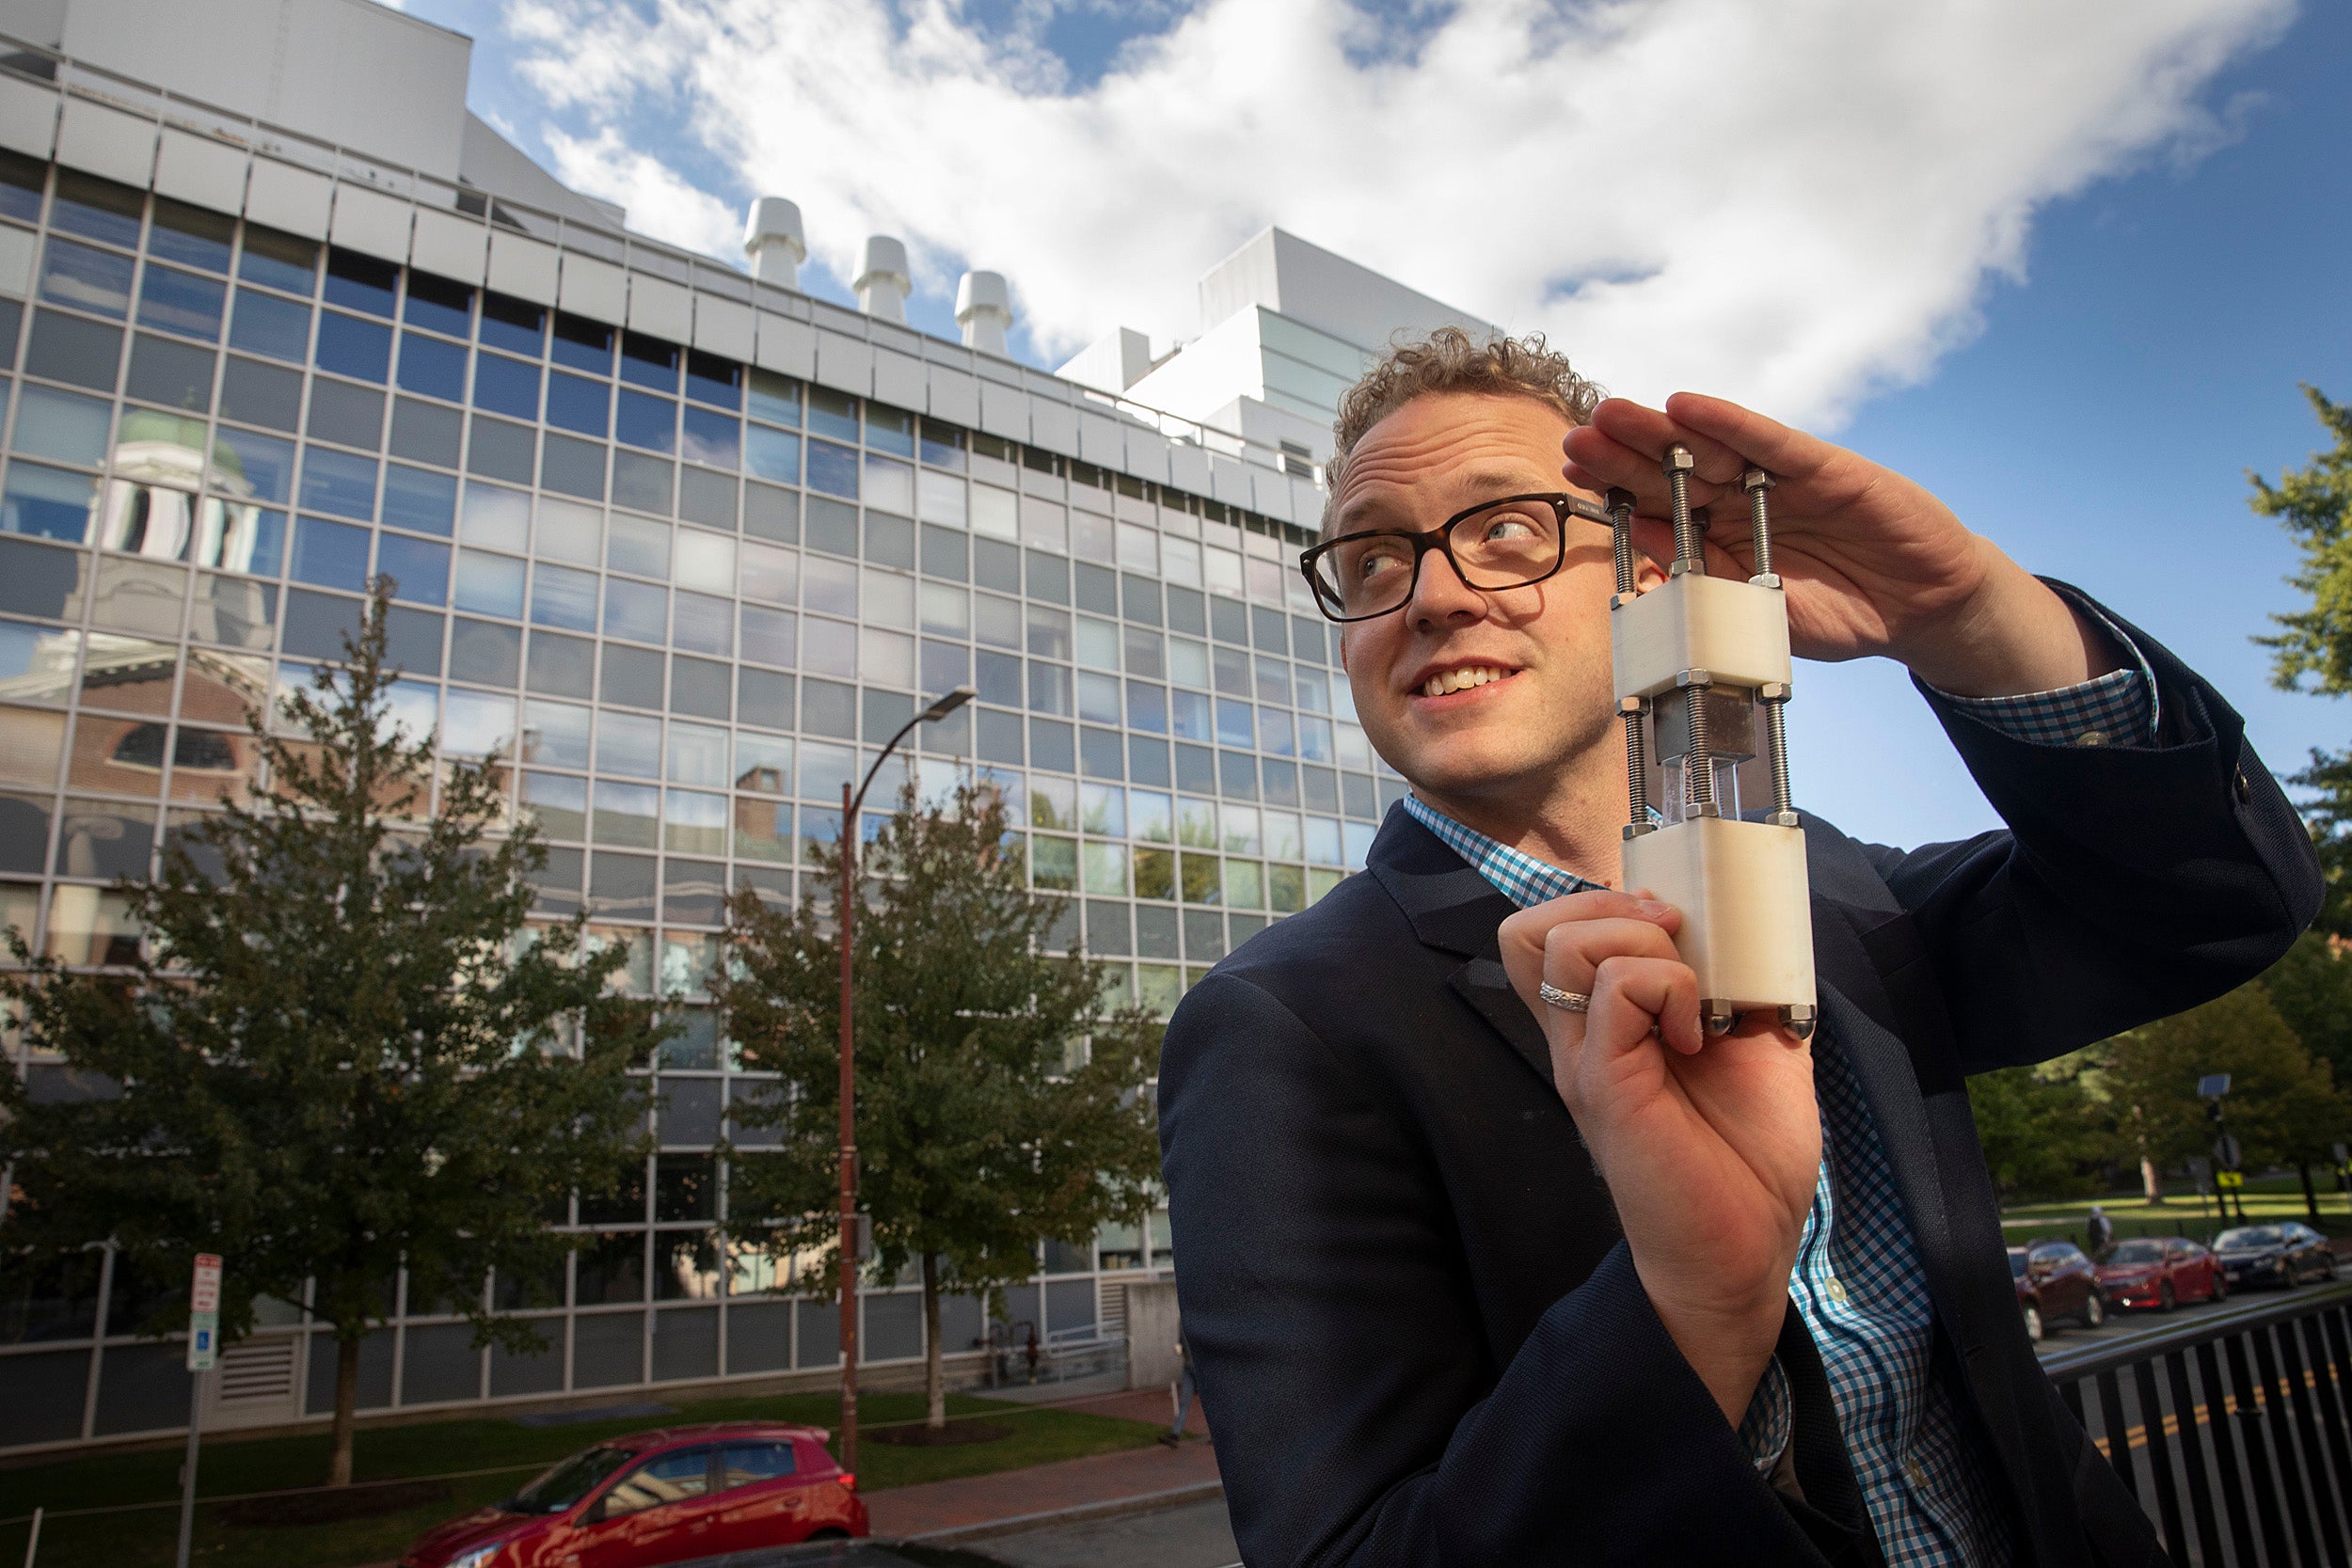 Christoffer Abrahamsson holding a small device